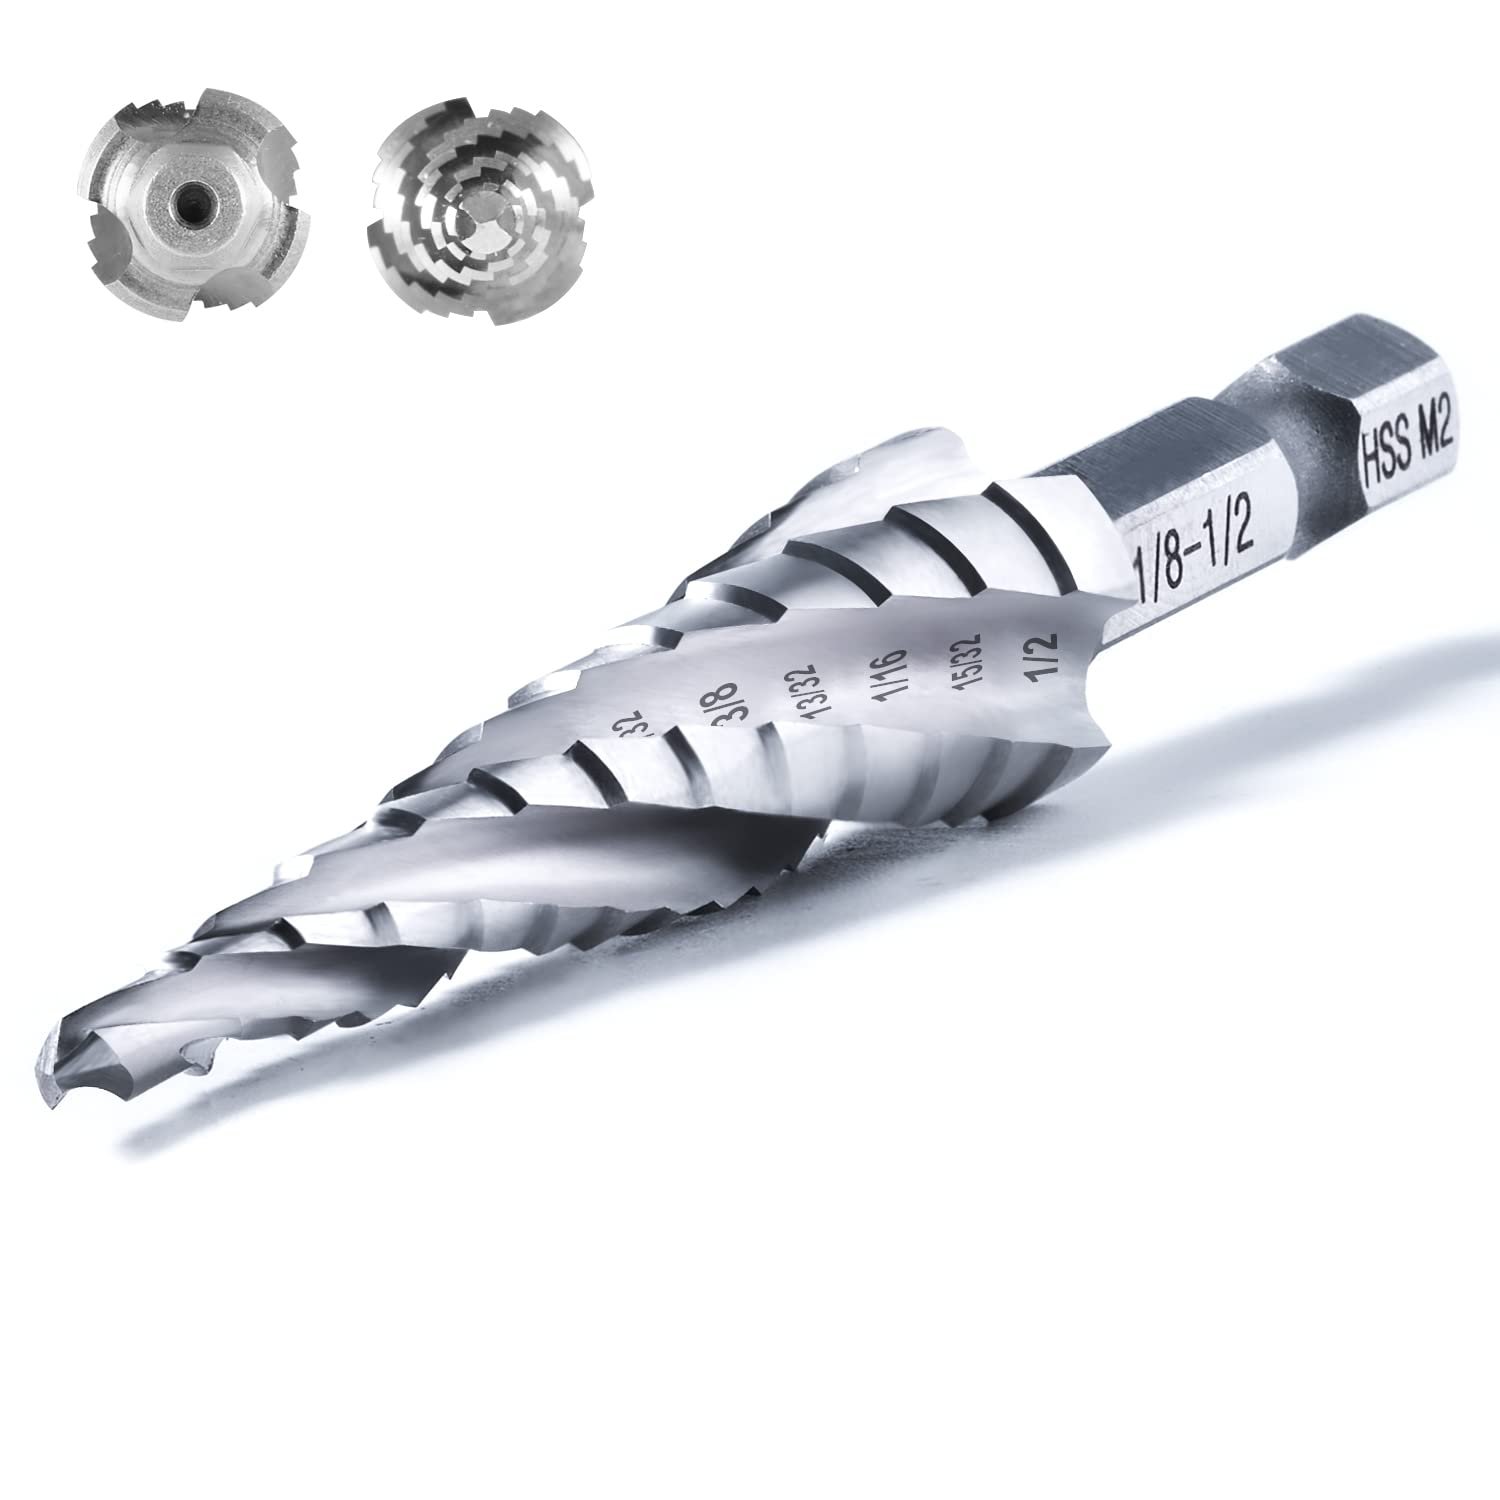 1/4" Hex Shank M2 HSS Four Spiral Flute Step Drill Bits for Metal, Wood, Plastic